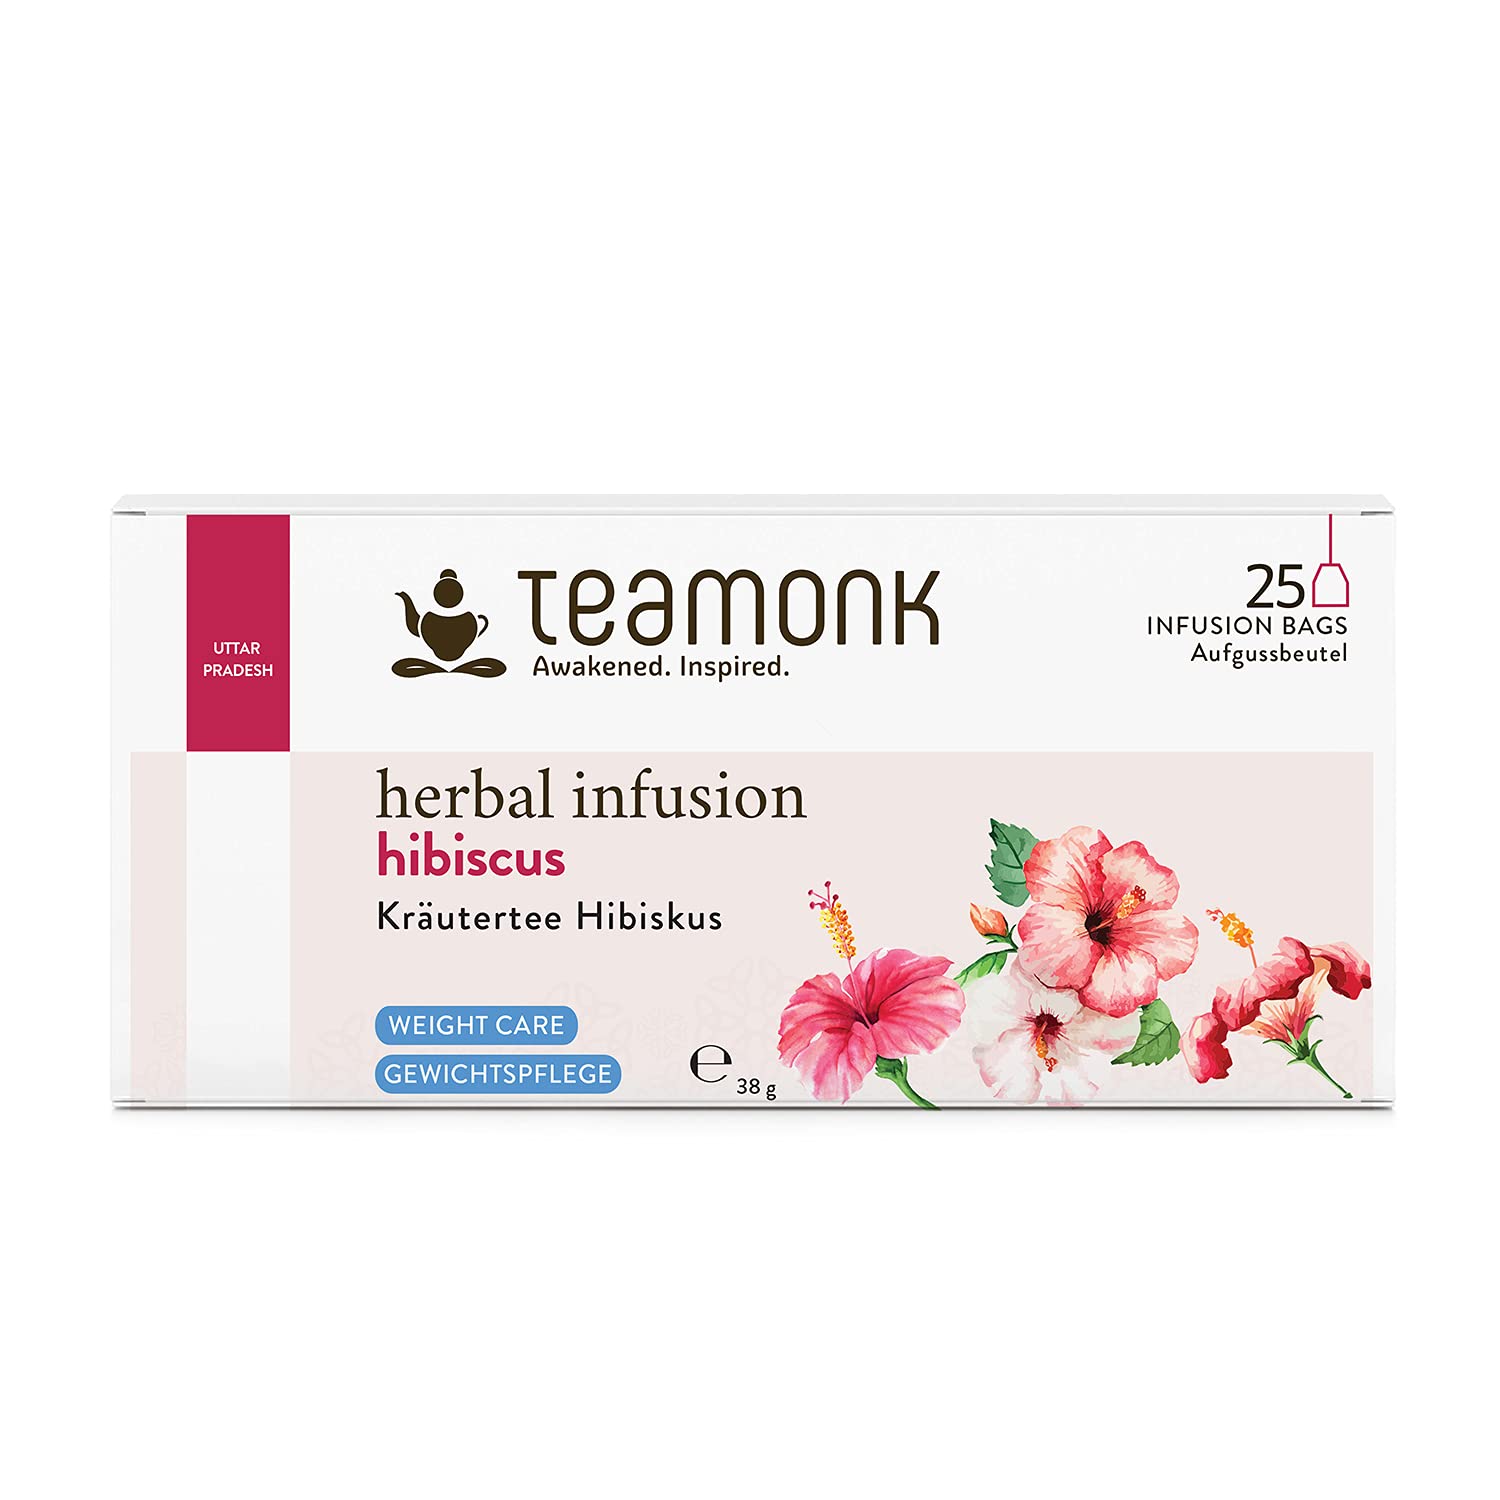 Teamonk Herbal Infusion Hibiscus Image